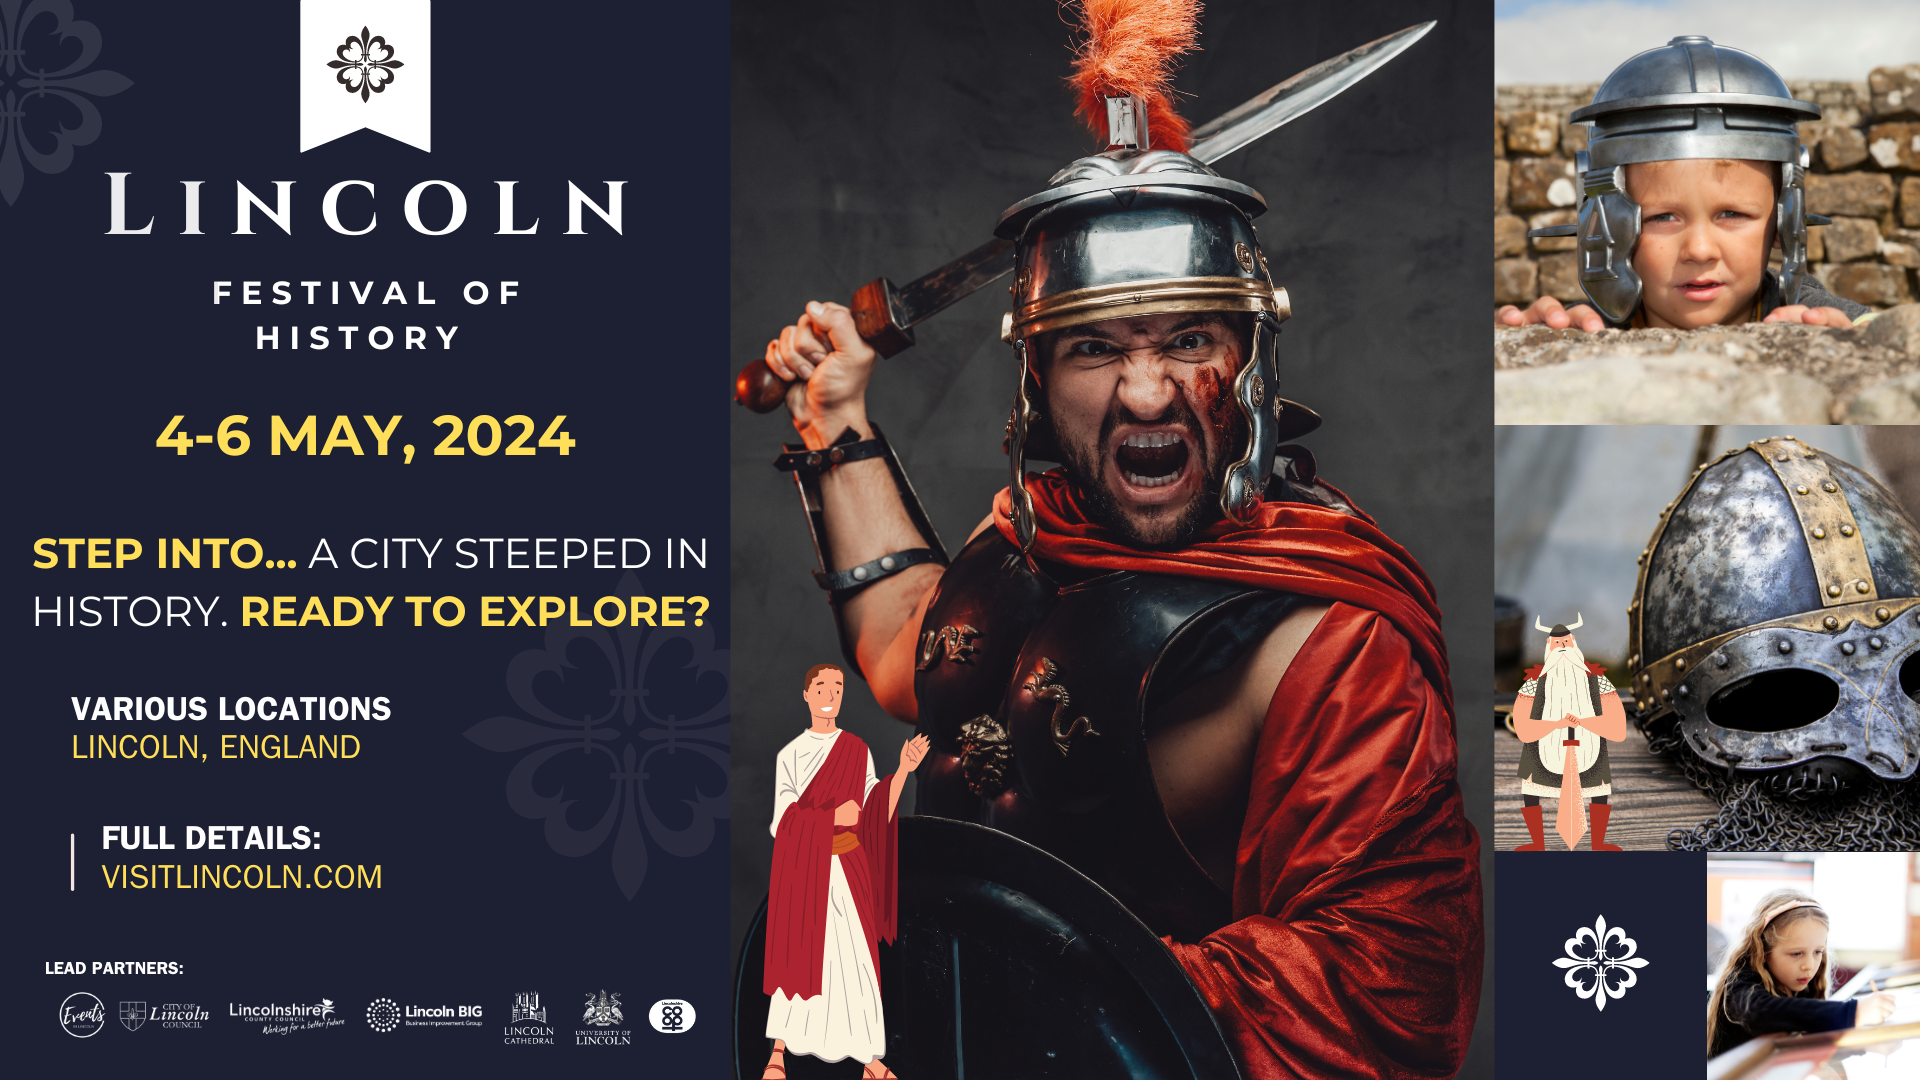 Poster advertising the Lincoln Festival of History. The poster features people wearing costumes from Roman and Viking times, representing the history of Lincoln. The festival will take place from 4 to 6 May.